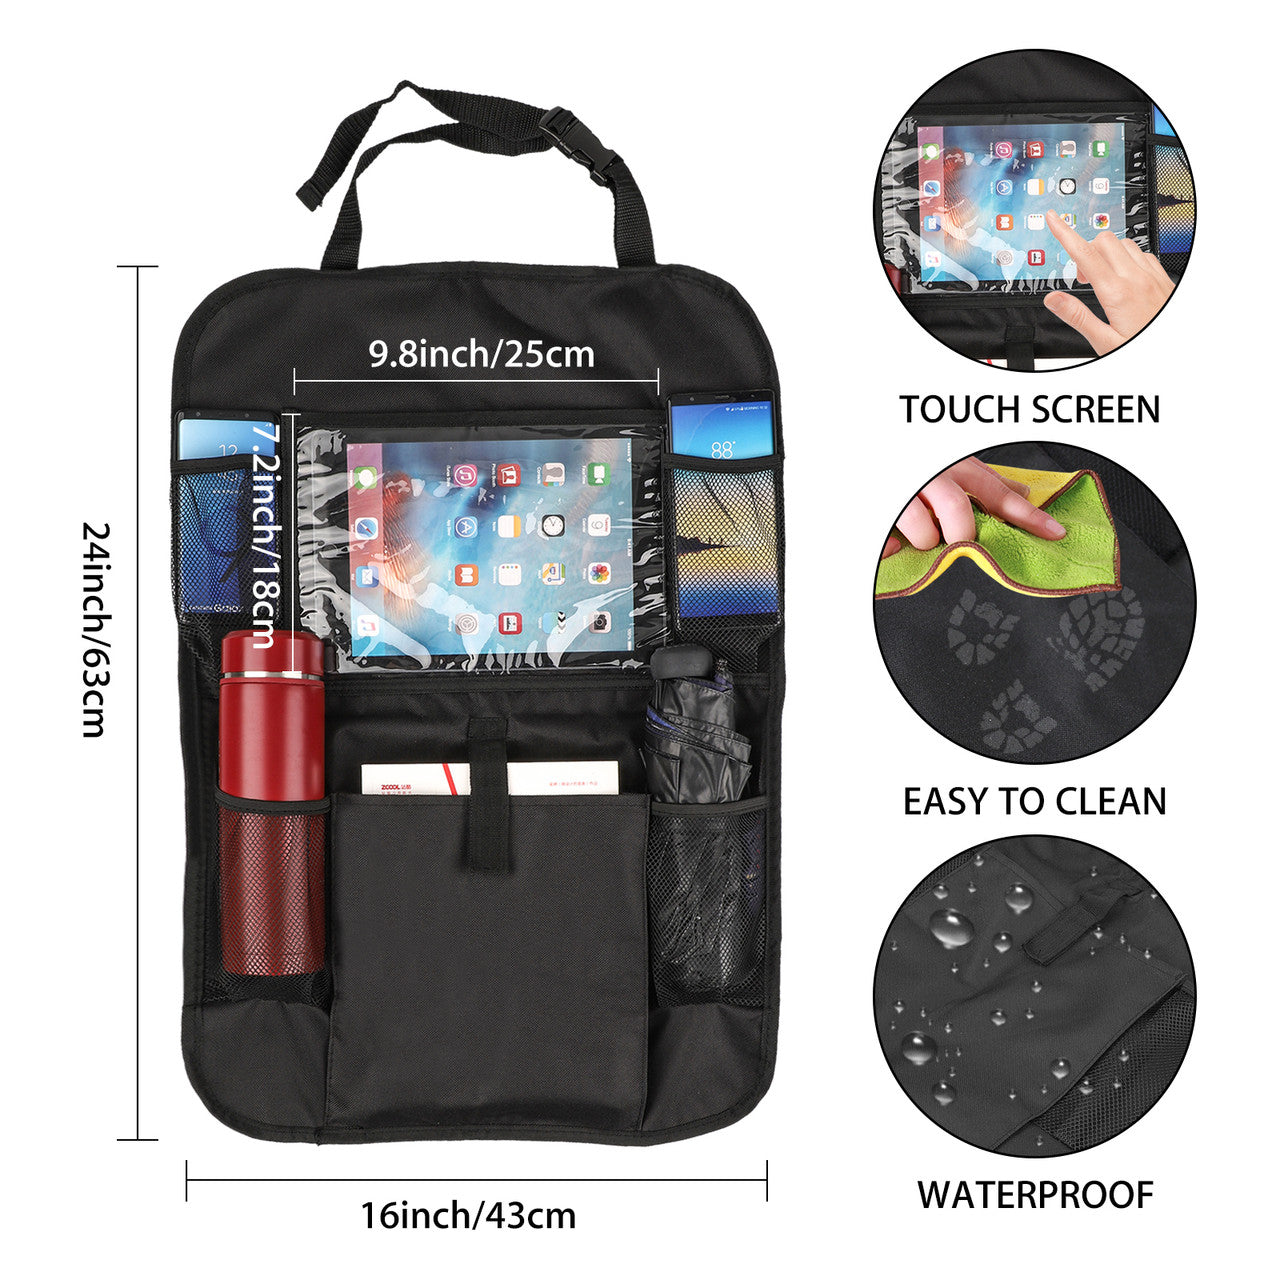 Car Backseat Organizer with Touch Screen Tablet Holder + 6 Storage Pockets